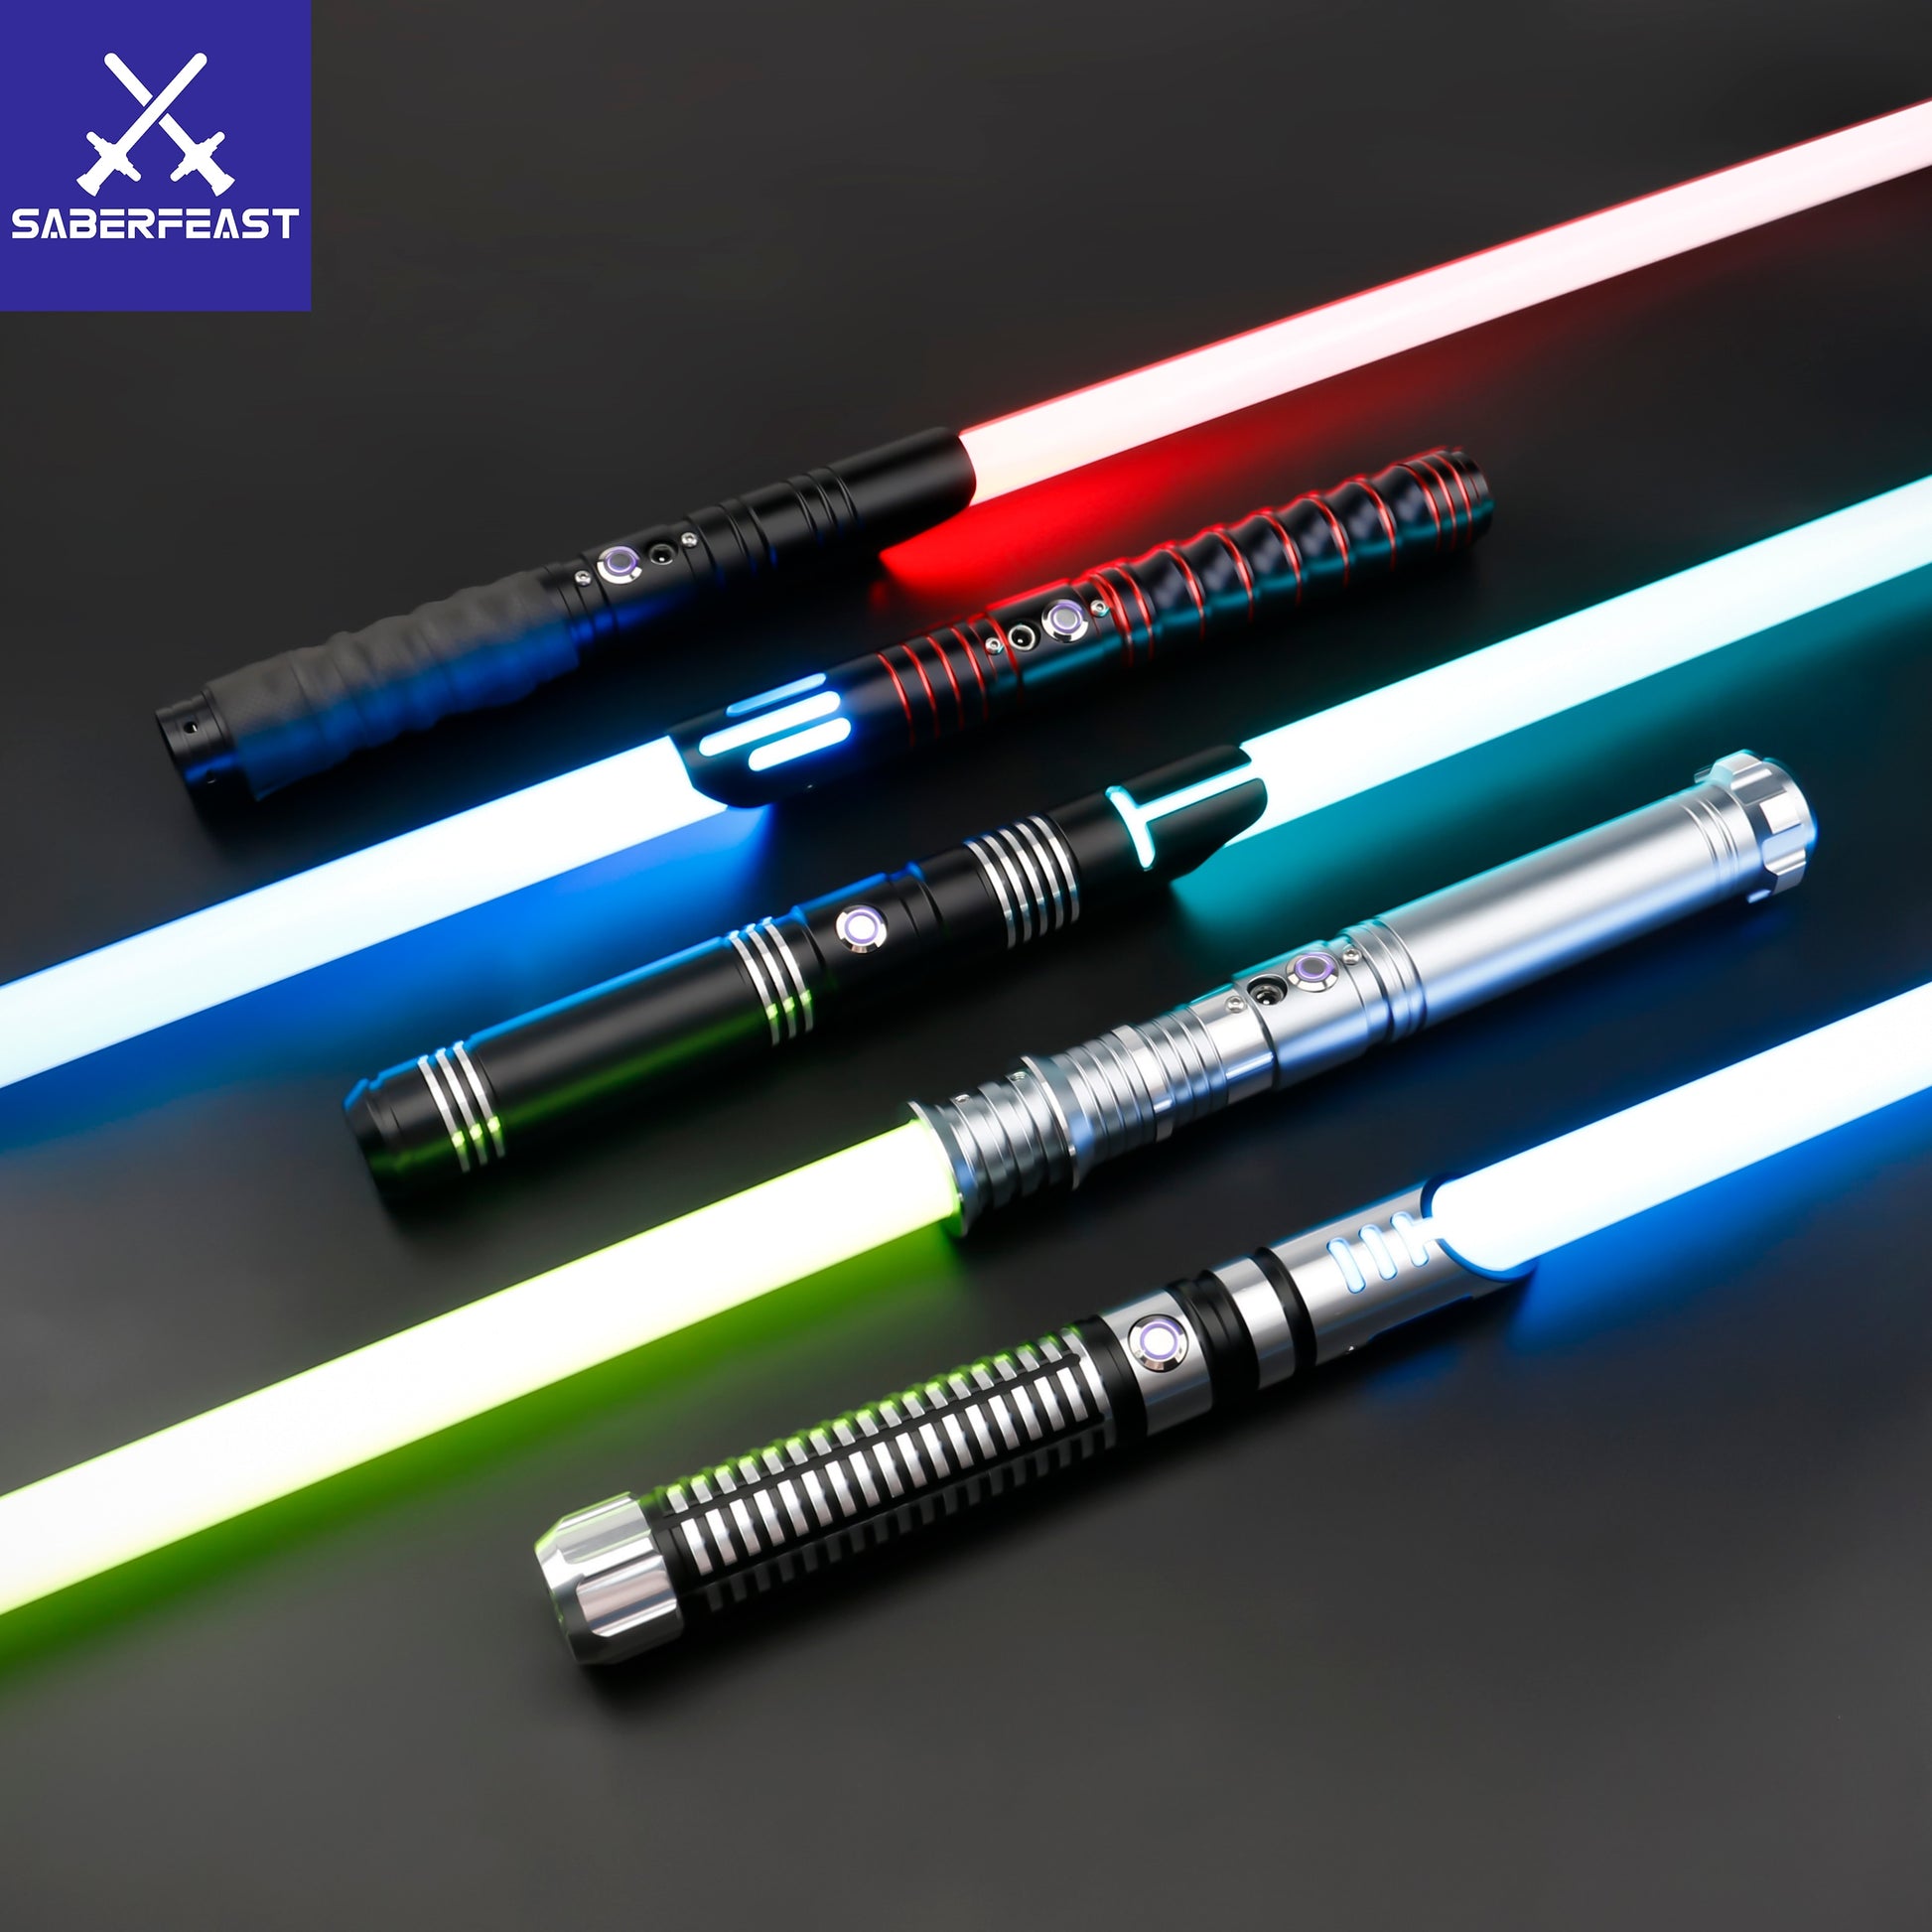 Workbench mat  Dueling and neopixel lightsabers